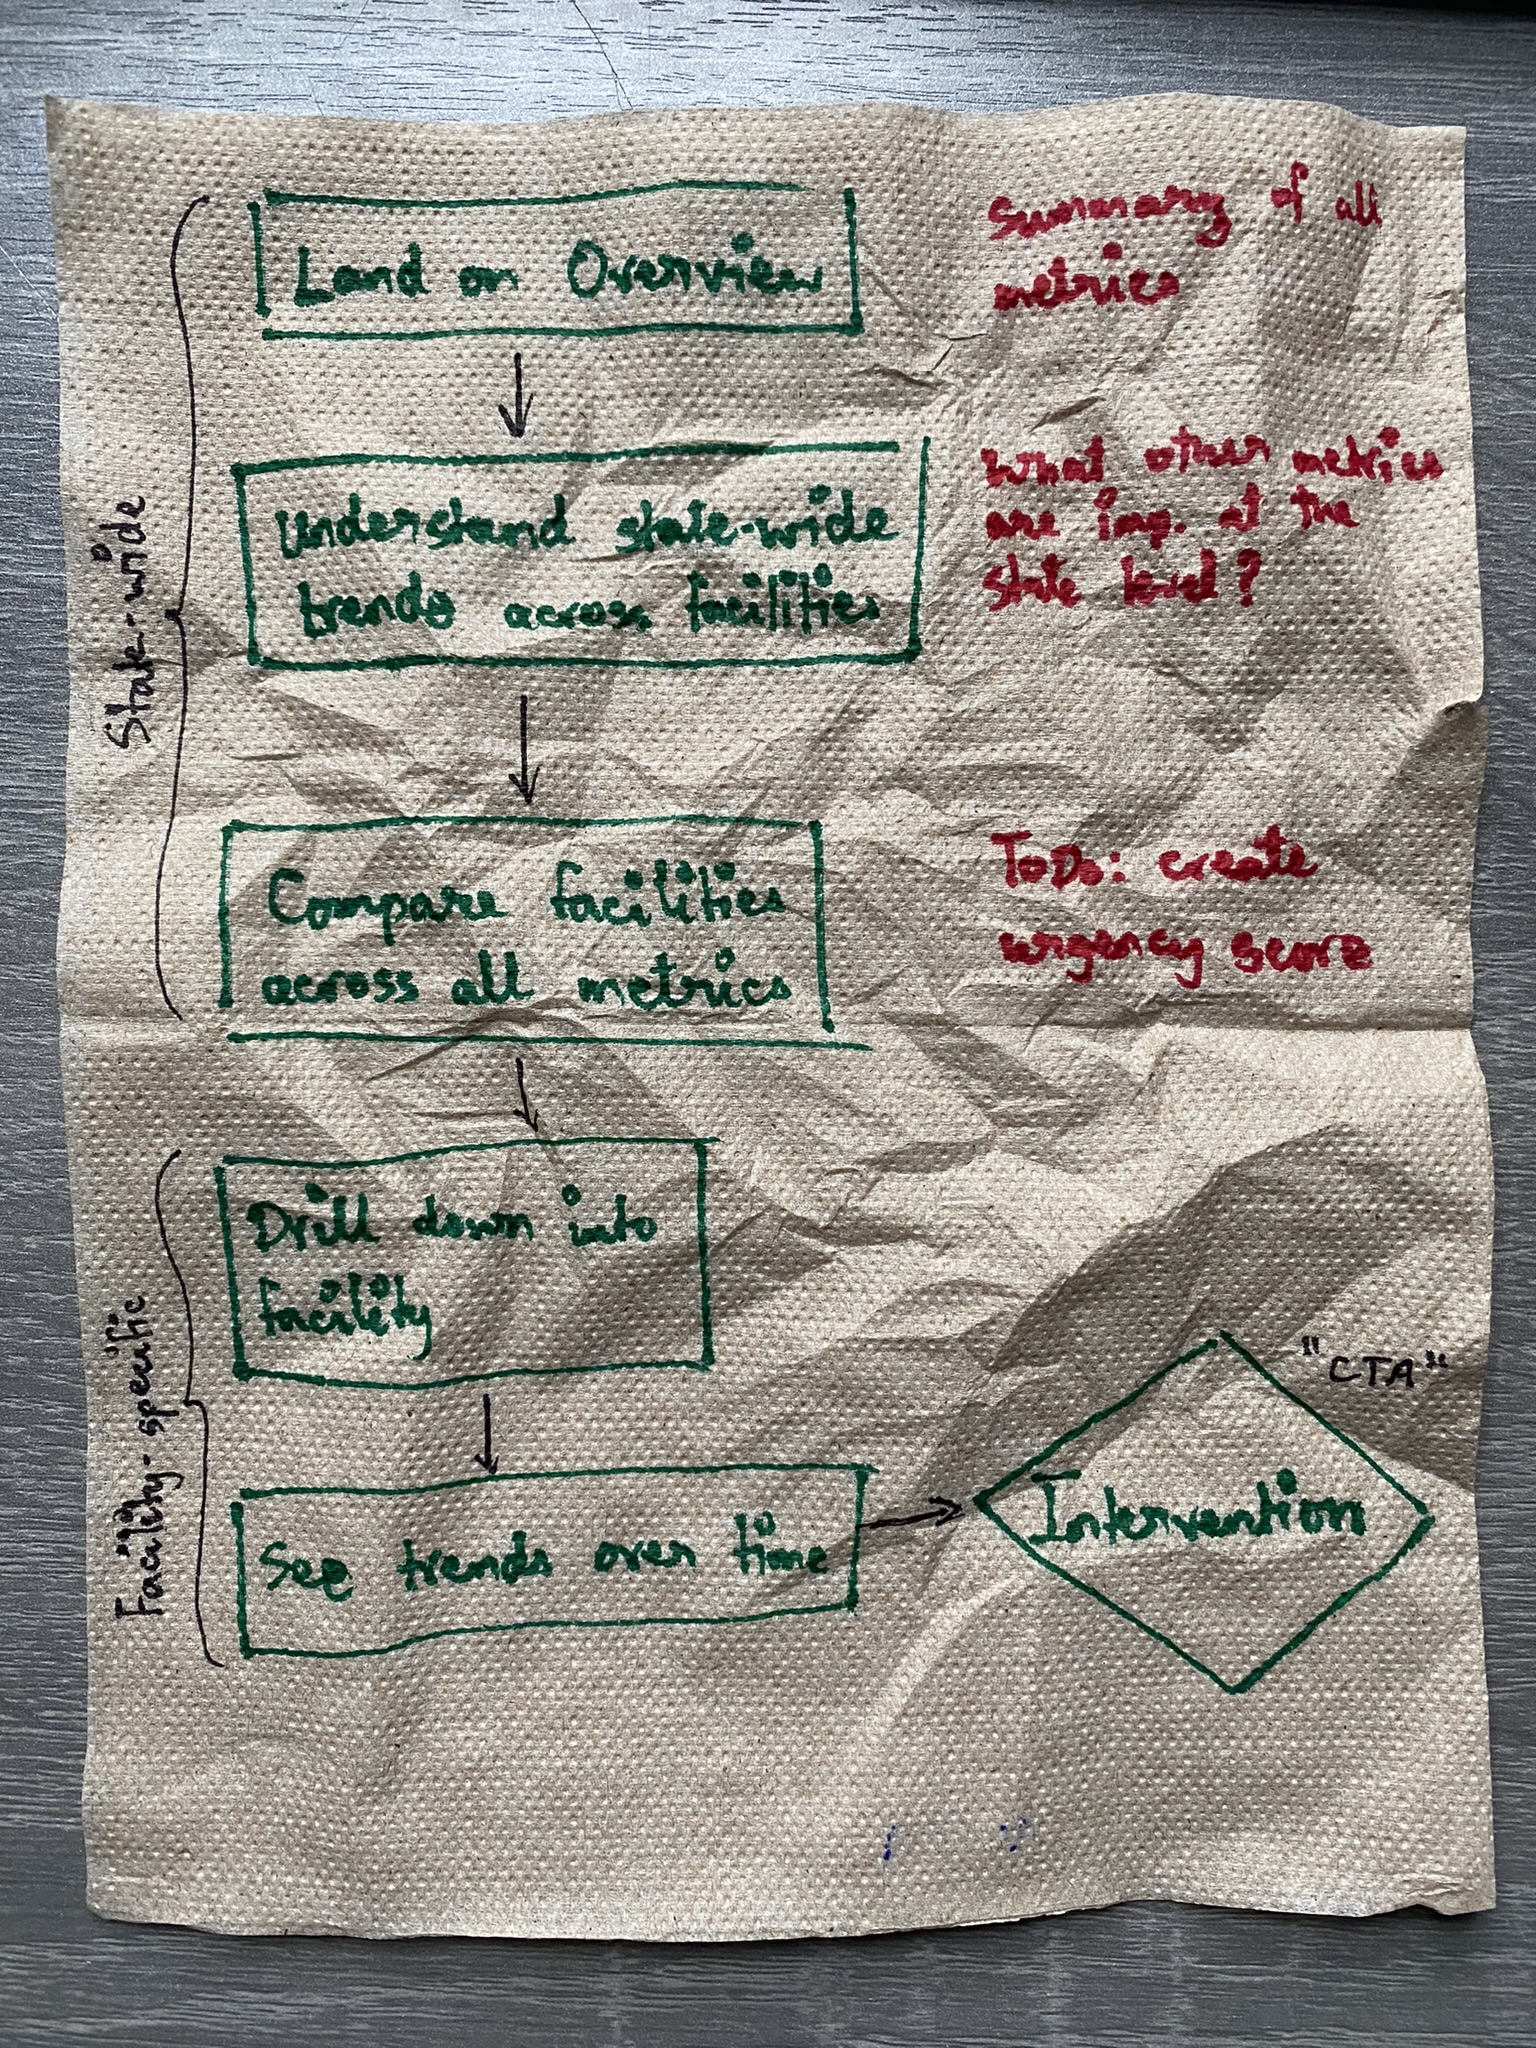 A picture of the back of a napkin showing the user flow diagram starting at the state-wide overview page navigating all the way to facility intervention.